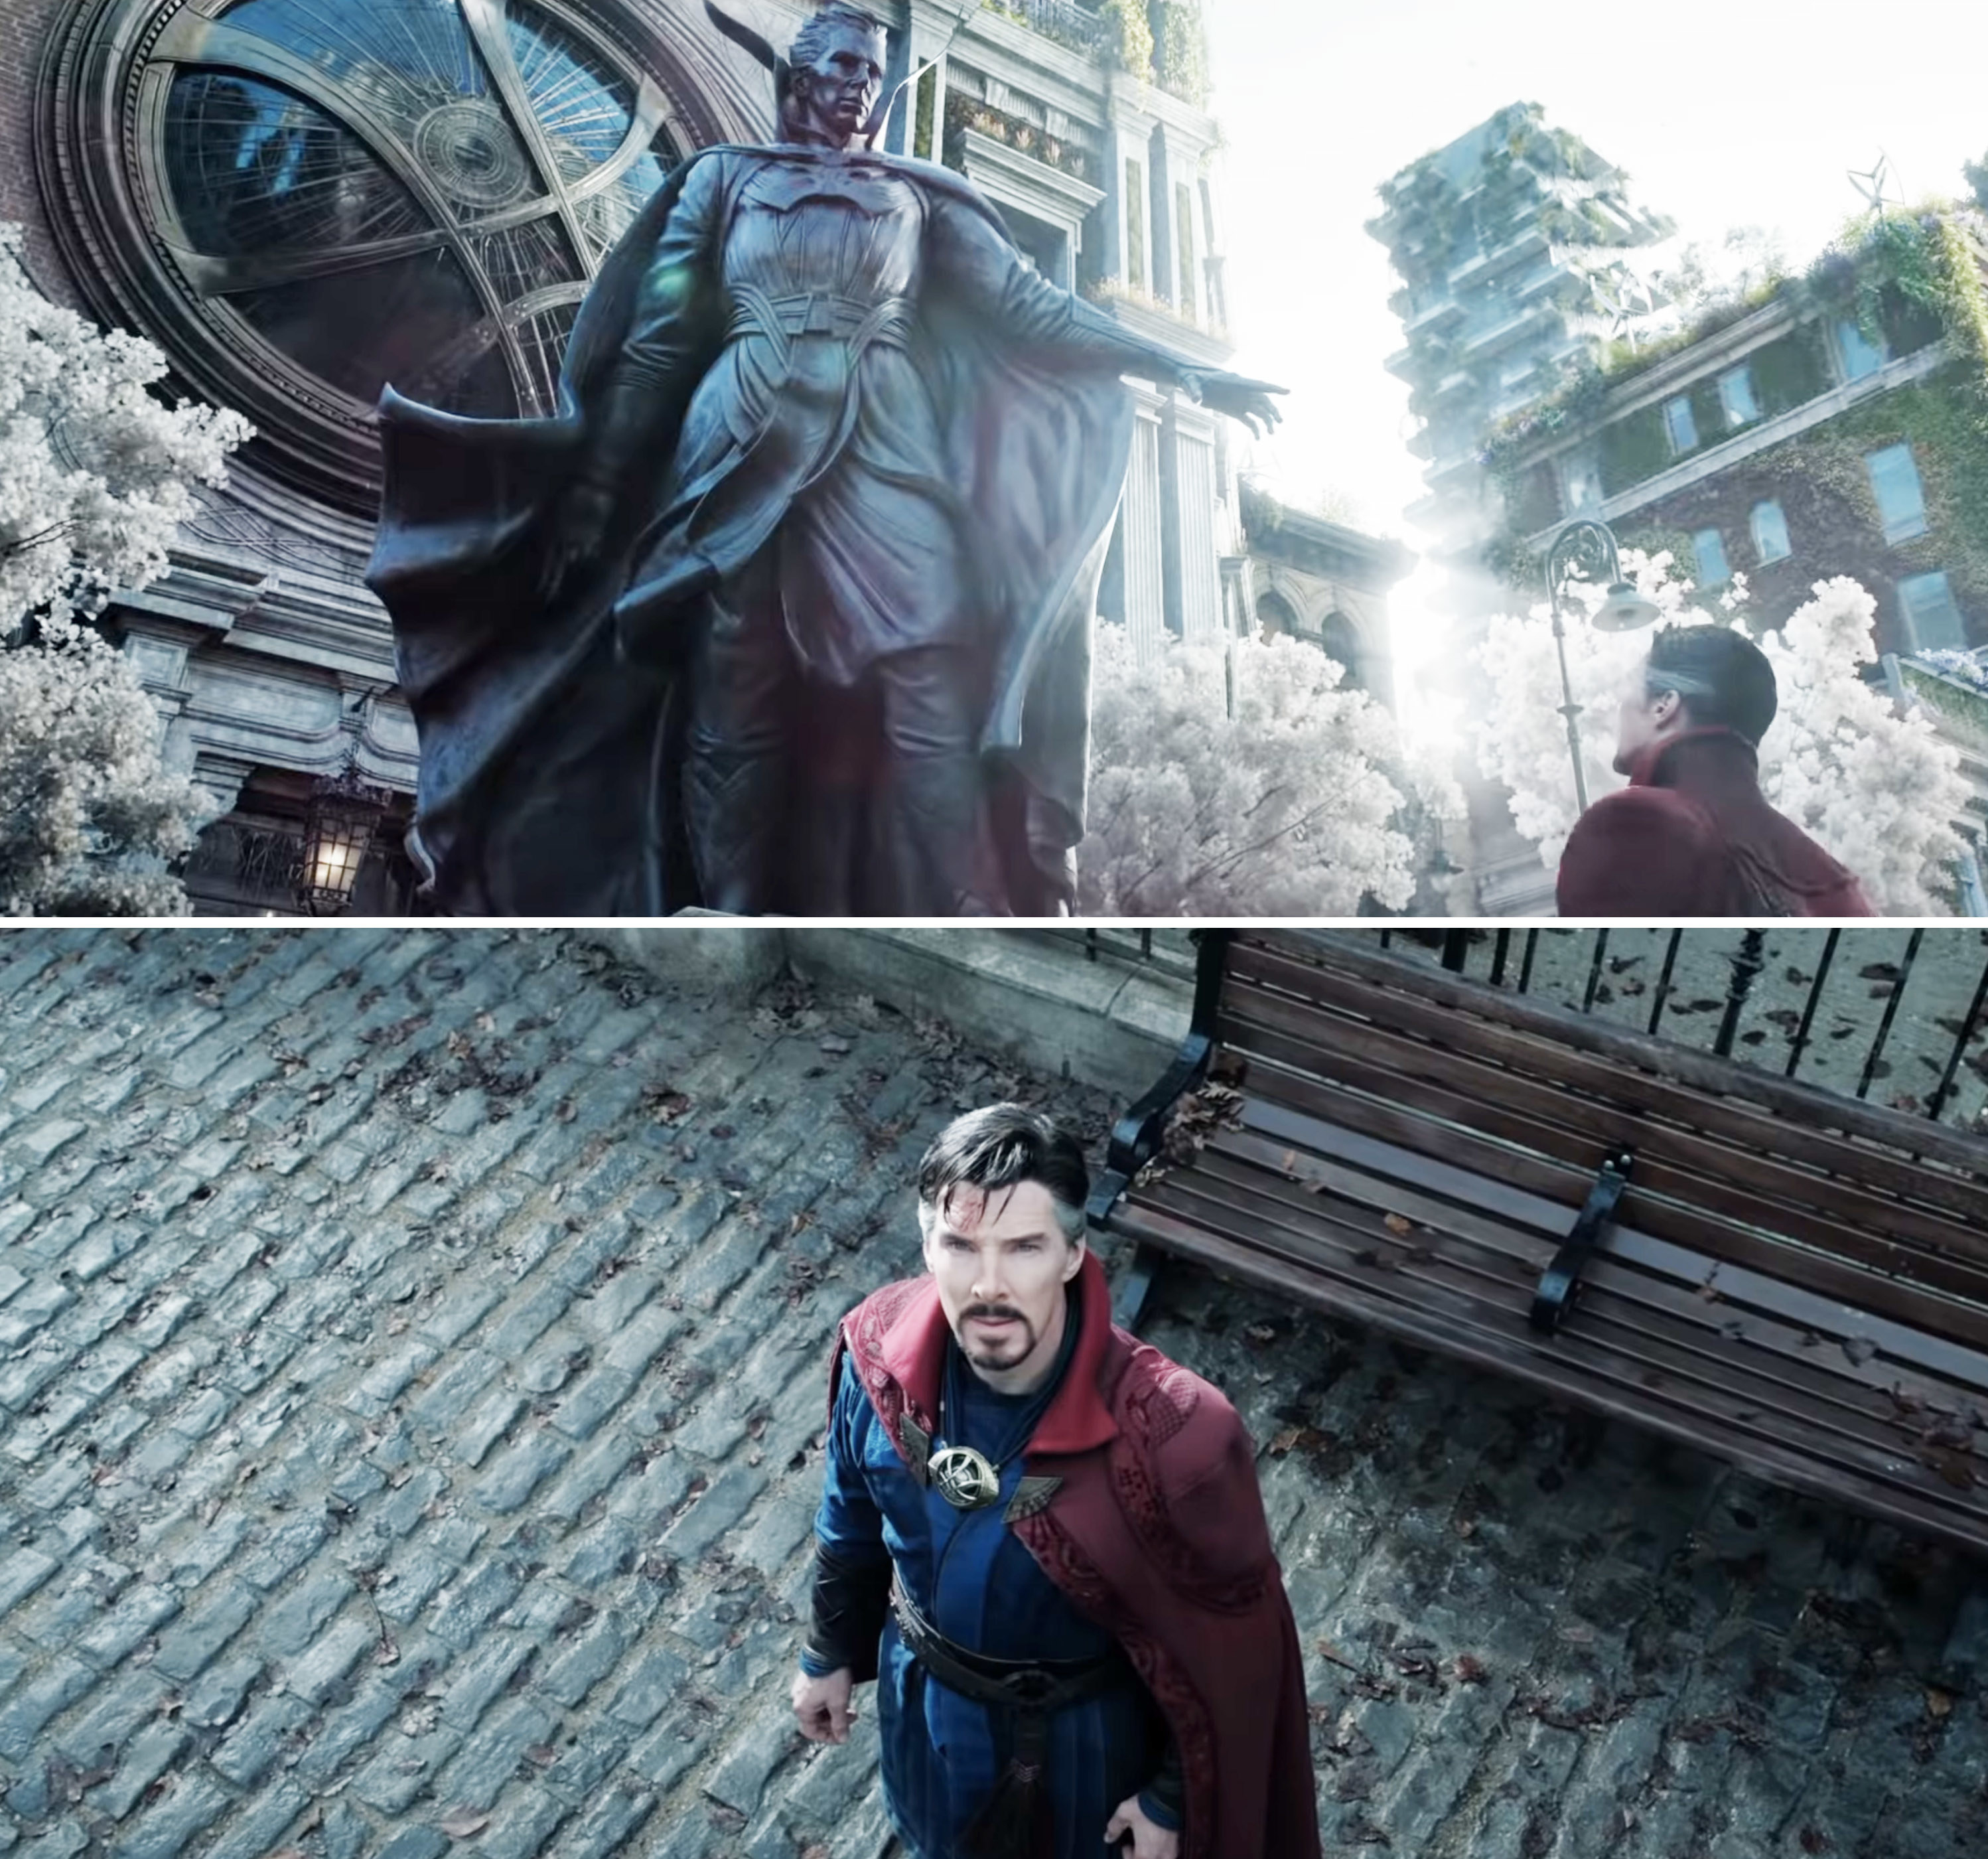 Doctor Strange memorial statue with Doctor Strange looking up at it